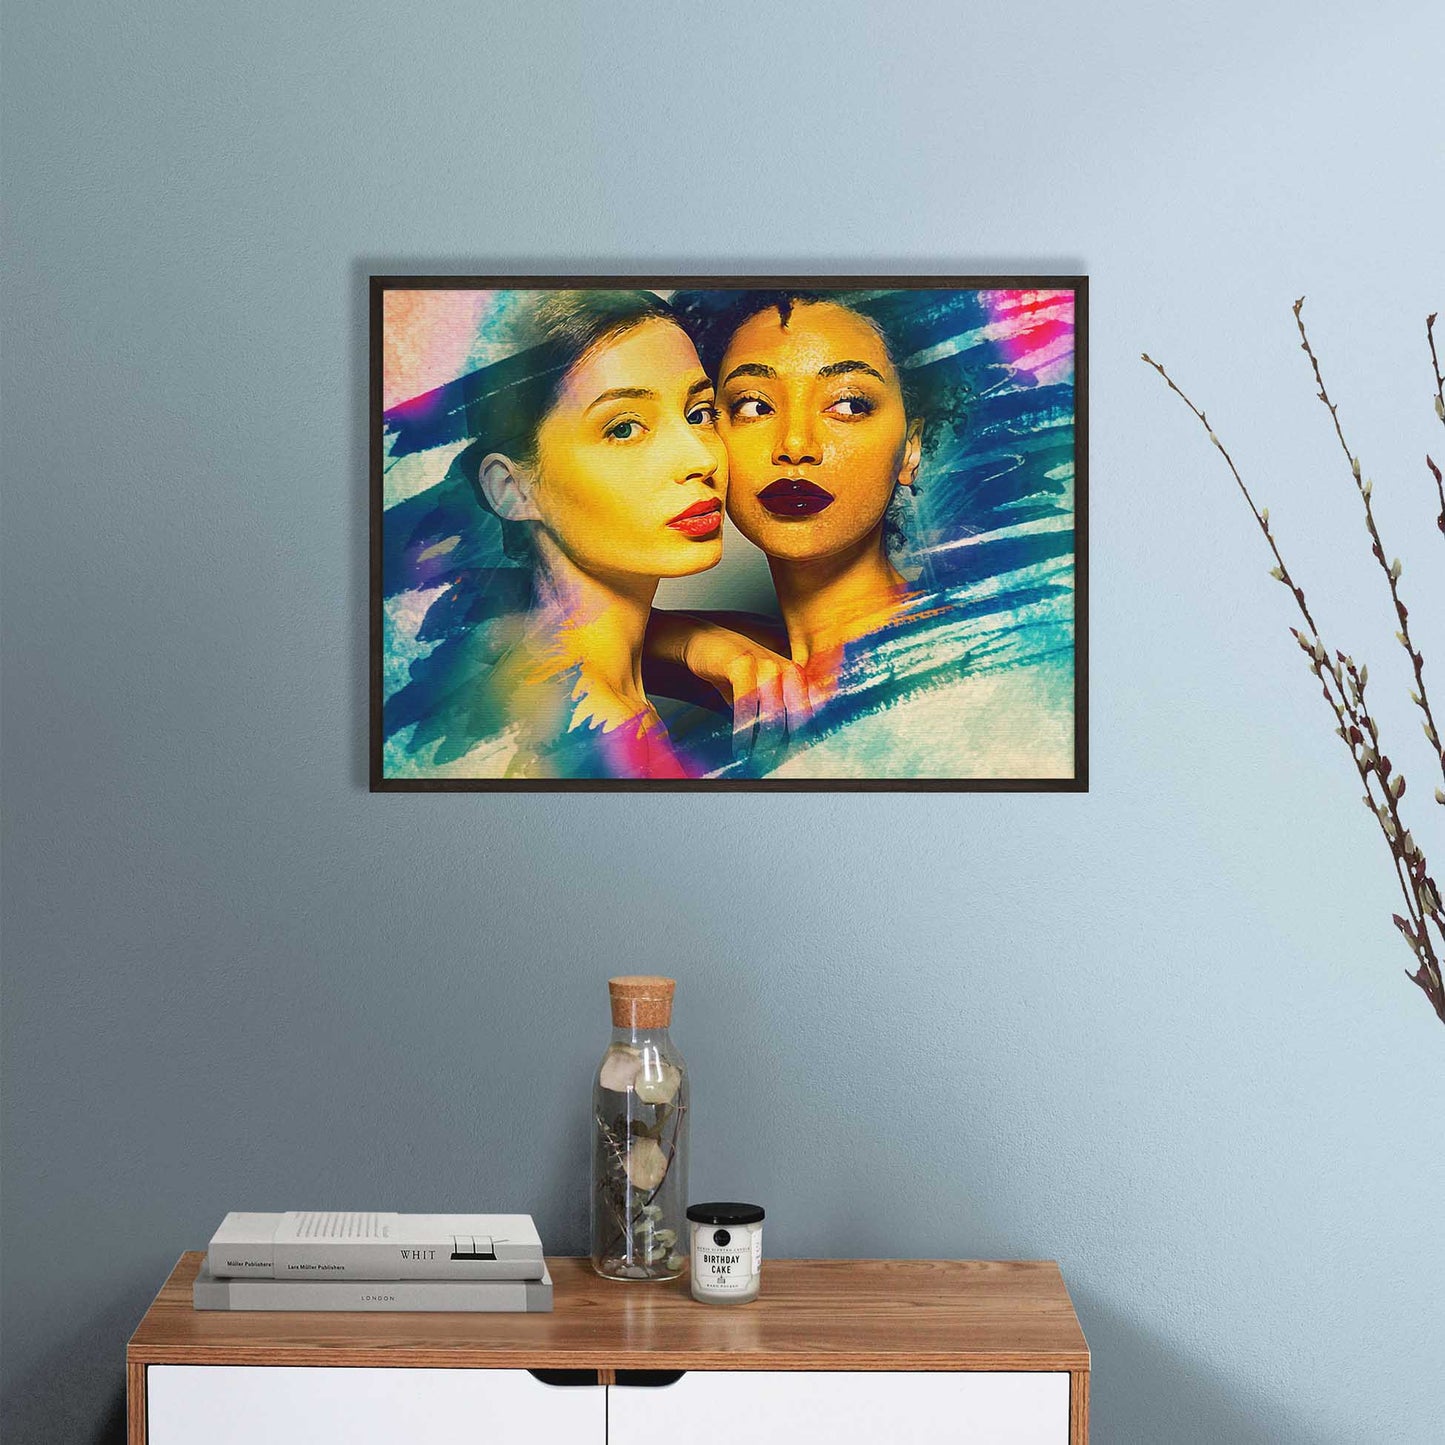 Celebrate the power of art with our Personalised Artistic Brush Painting Framed Print. Crafted from your photo, this unique artwork is a testament to originality and creativity. The beautiful watercolor-style brushwork and imaginative design